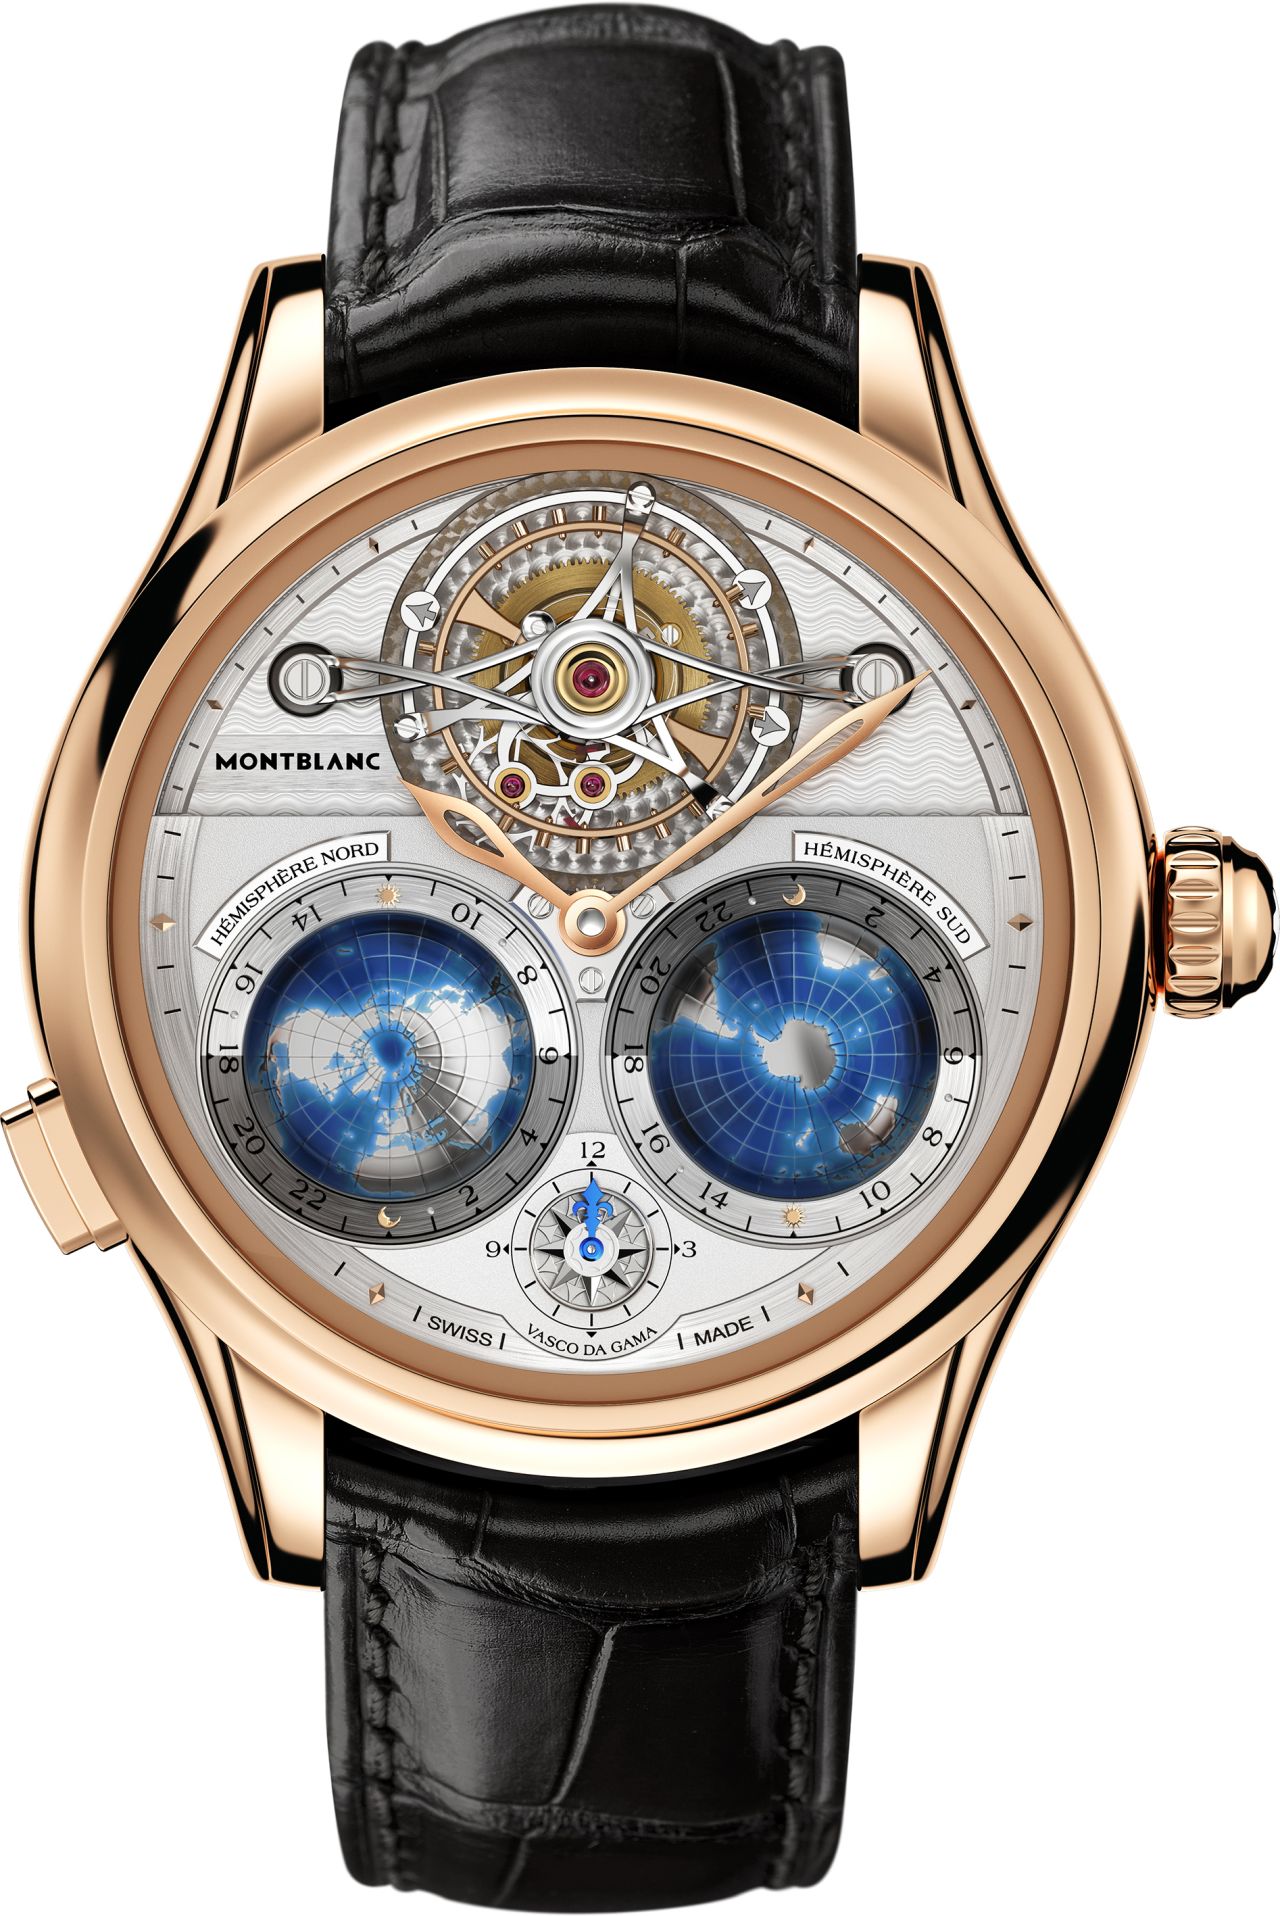 <a href="https://montblanc.com/en-gb/default.aspx?sc_lang=en-gb" target="_blank" target="_blank">Montblanc</a>'s Tourbillon Cylindrique Geosphères Vasco da Gama was inspired by the Portuguese explorer, who established the first ocean route from Europe to Asia. A disc around each globe, which represent the northern and southern hemispheres, rotate once a day to reflect the passing of day and night. 